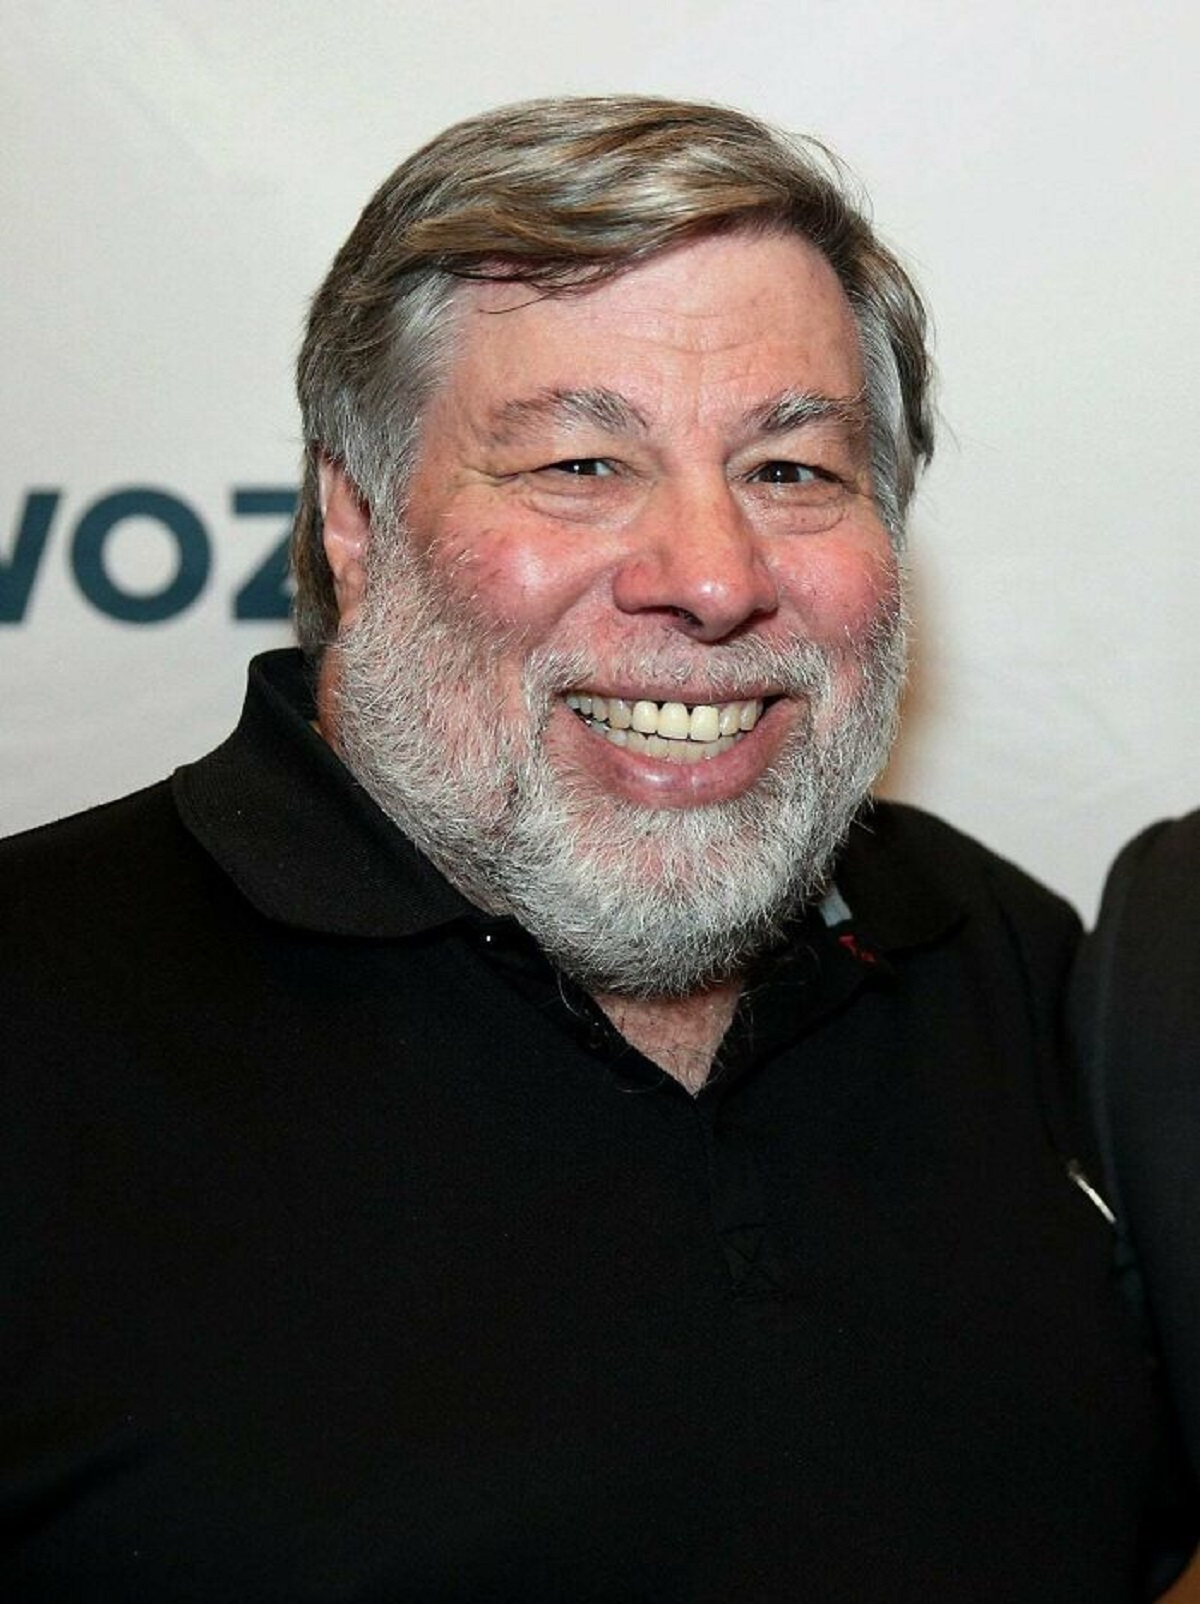 Apple co-founder Steve Wozniak has disdain for money and large wealth accumulation. In 2017 he said he didn’t want to be near money, because it could corrupt your values. When Apple went public, Wozniak offered $10 million of his stock to early Apple employees, something Jobs refused to do.